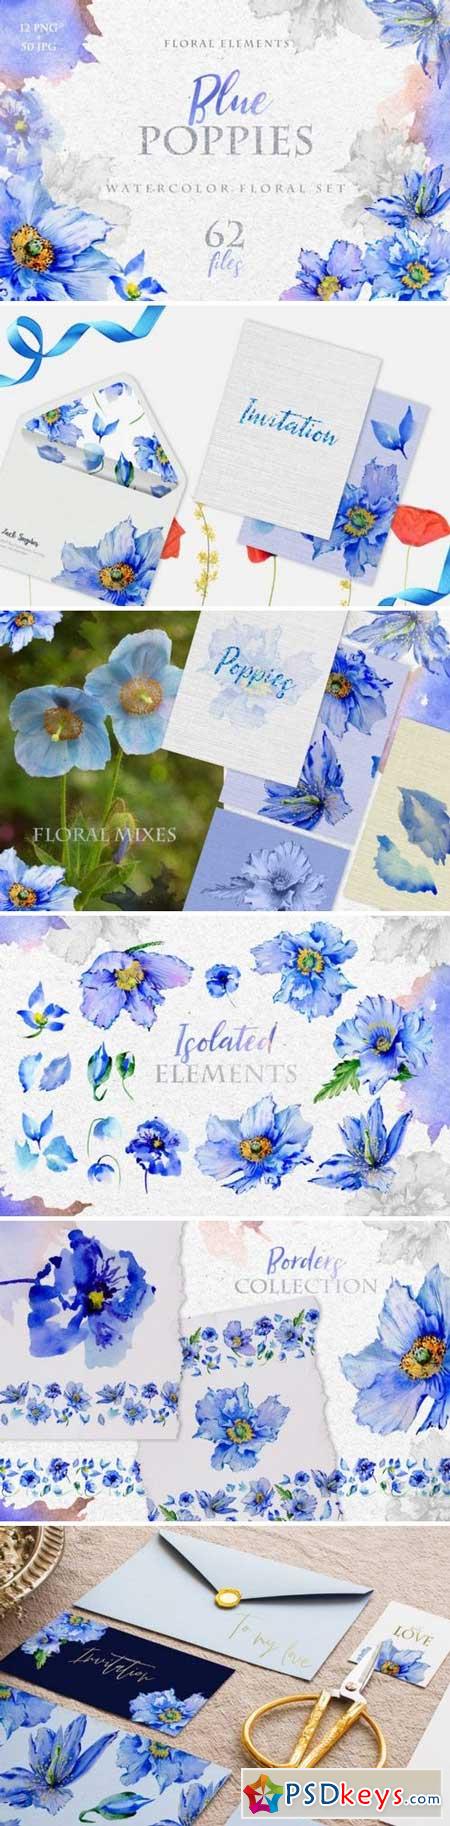 Blue Poppies Watercolor png 3319870